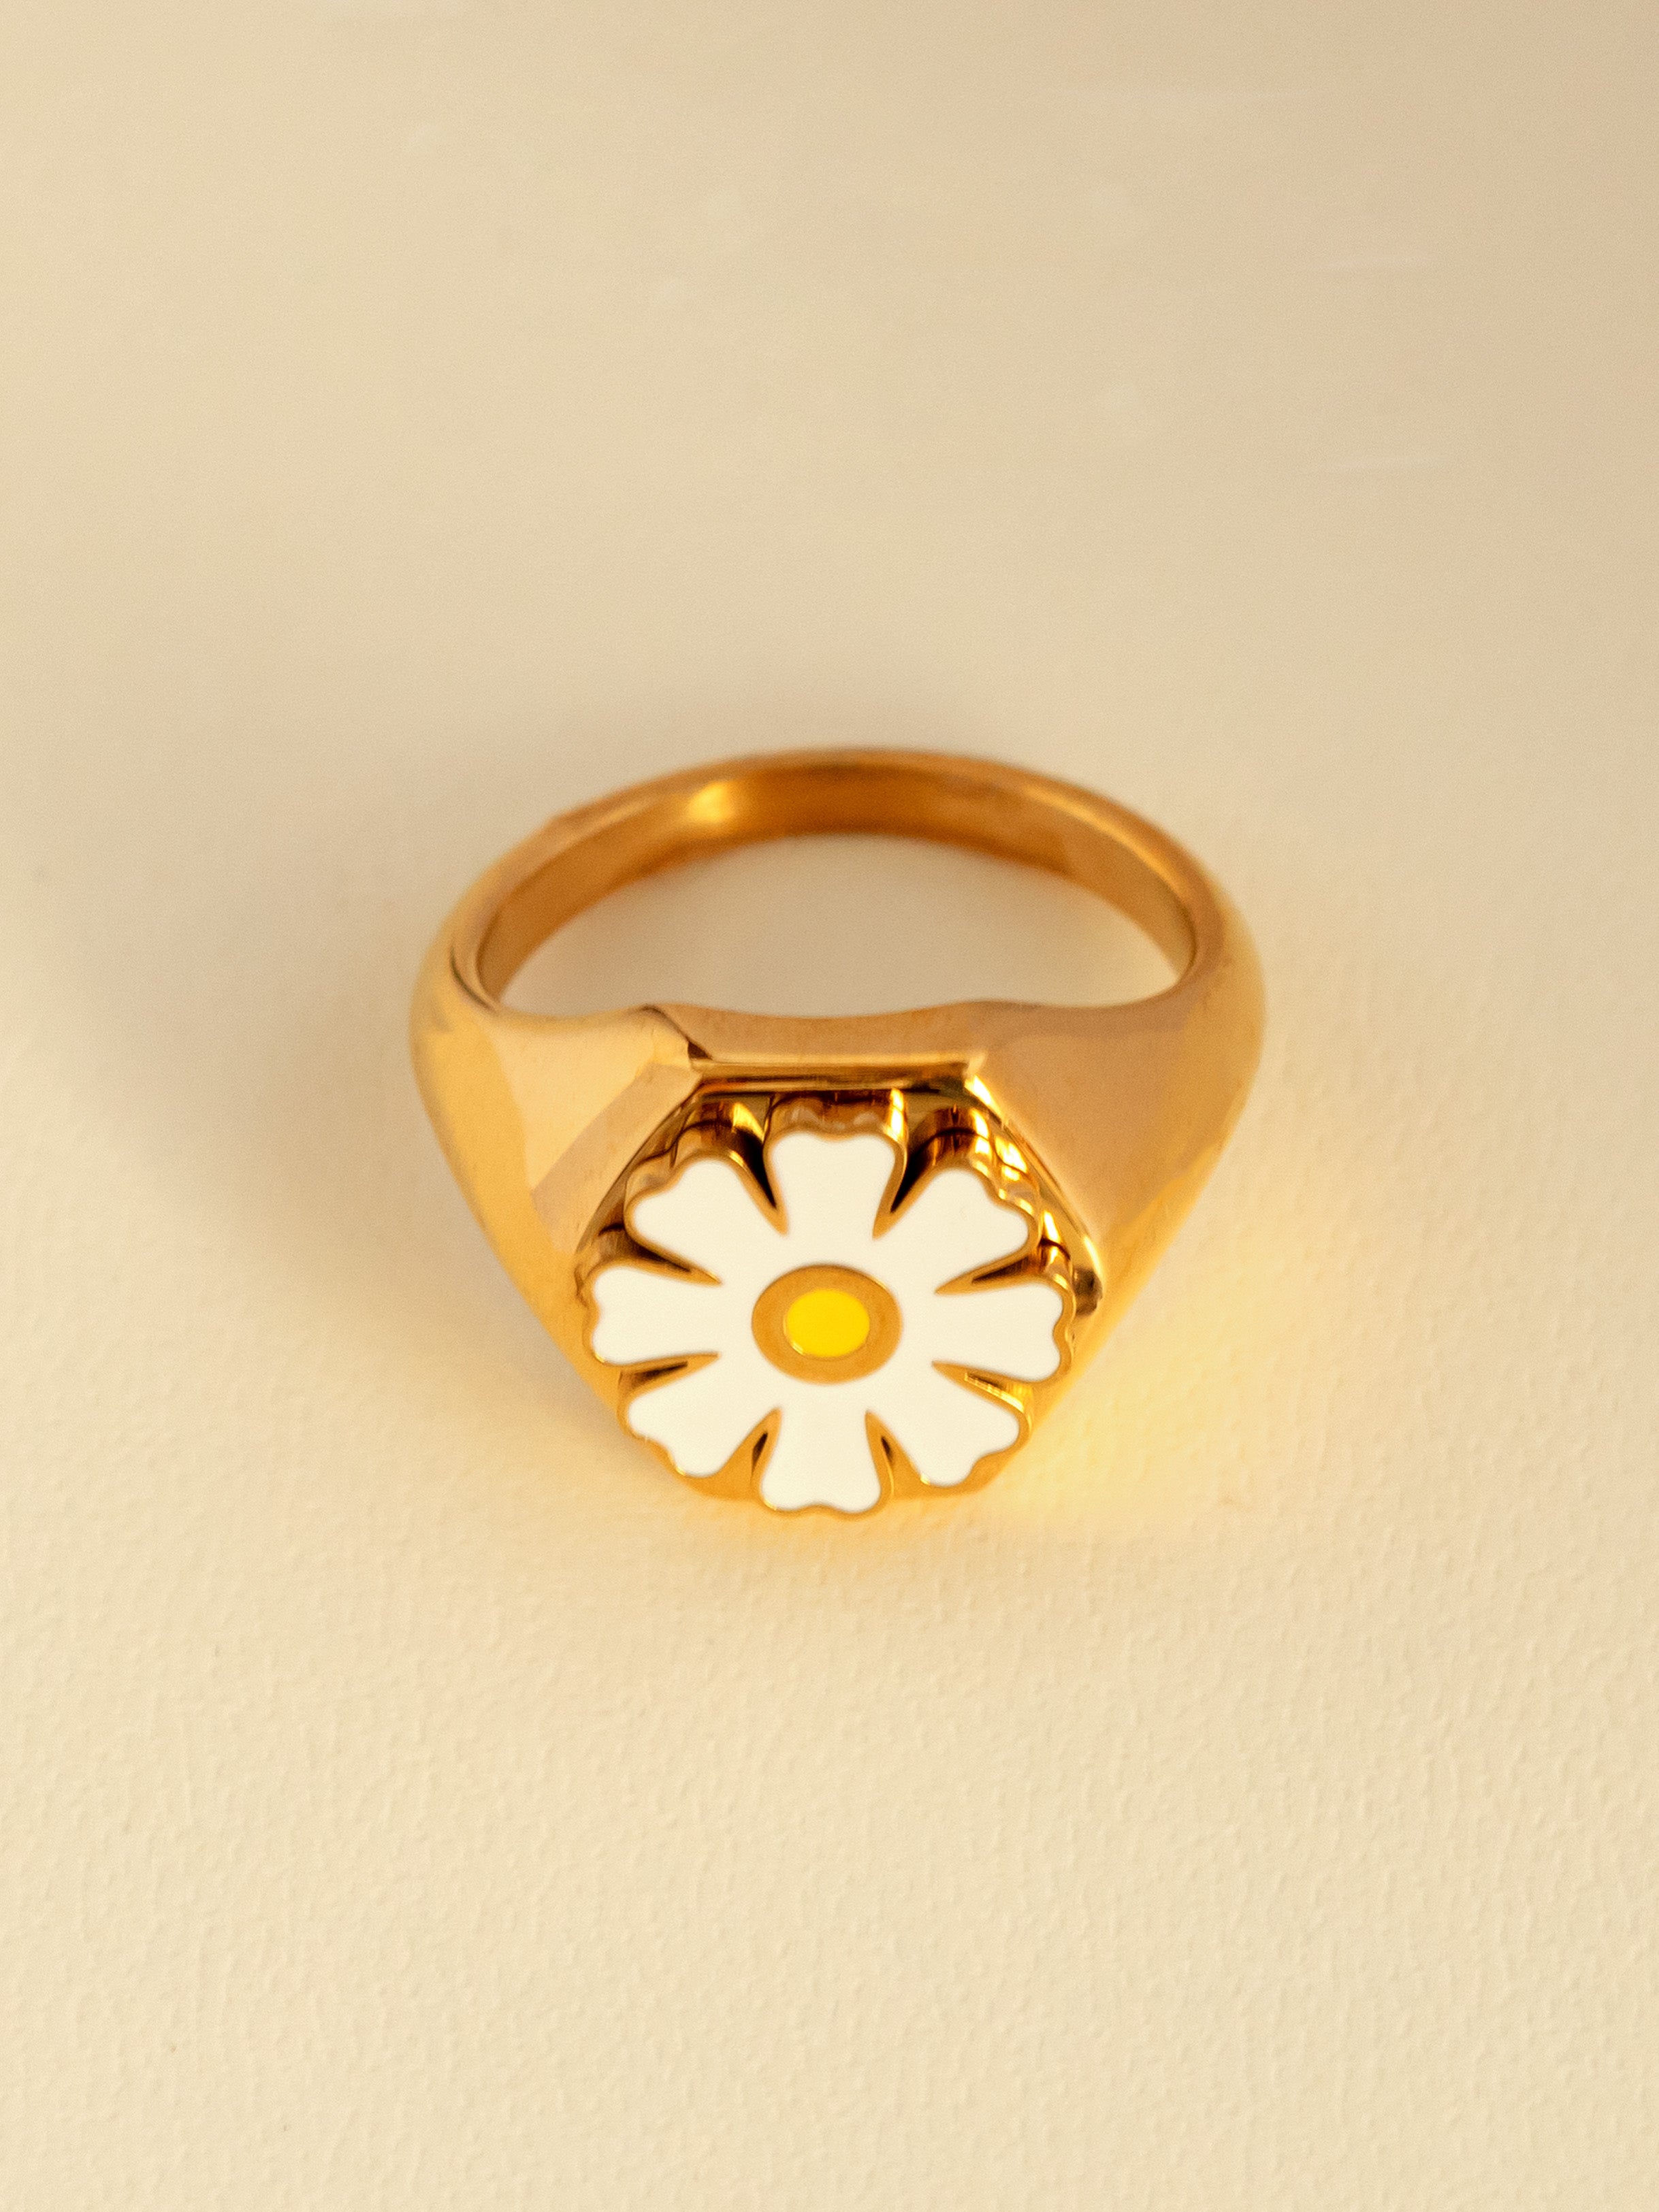 Gold Big Signet Ring With White Daisy Flower